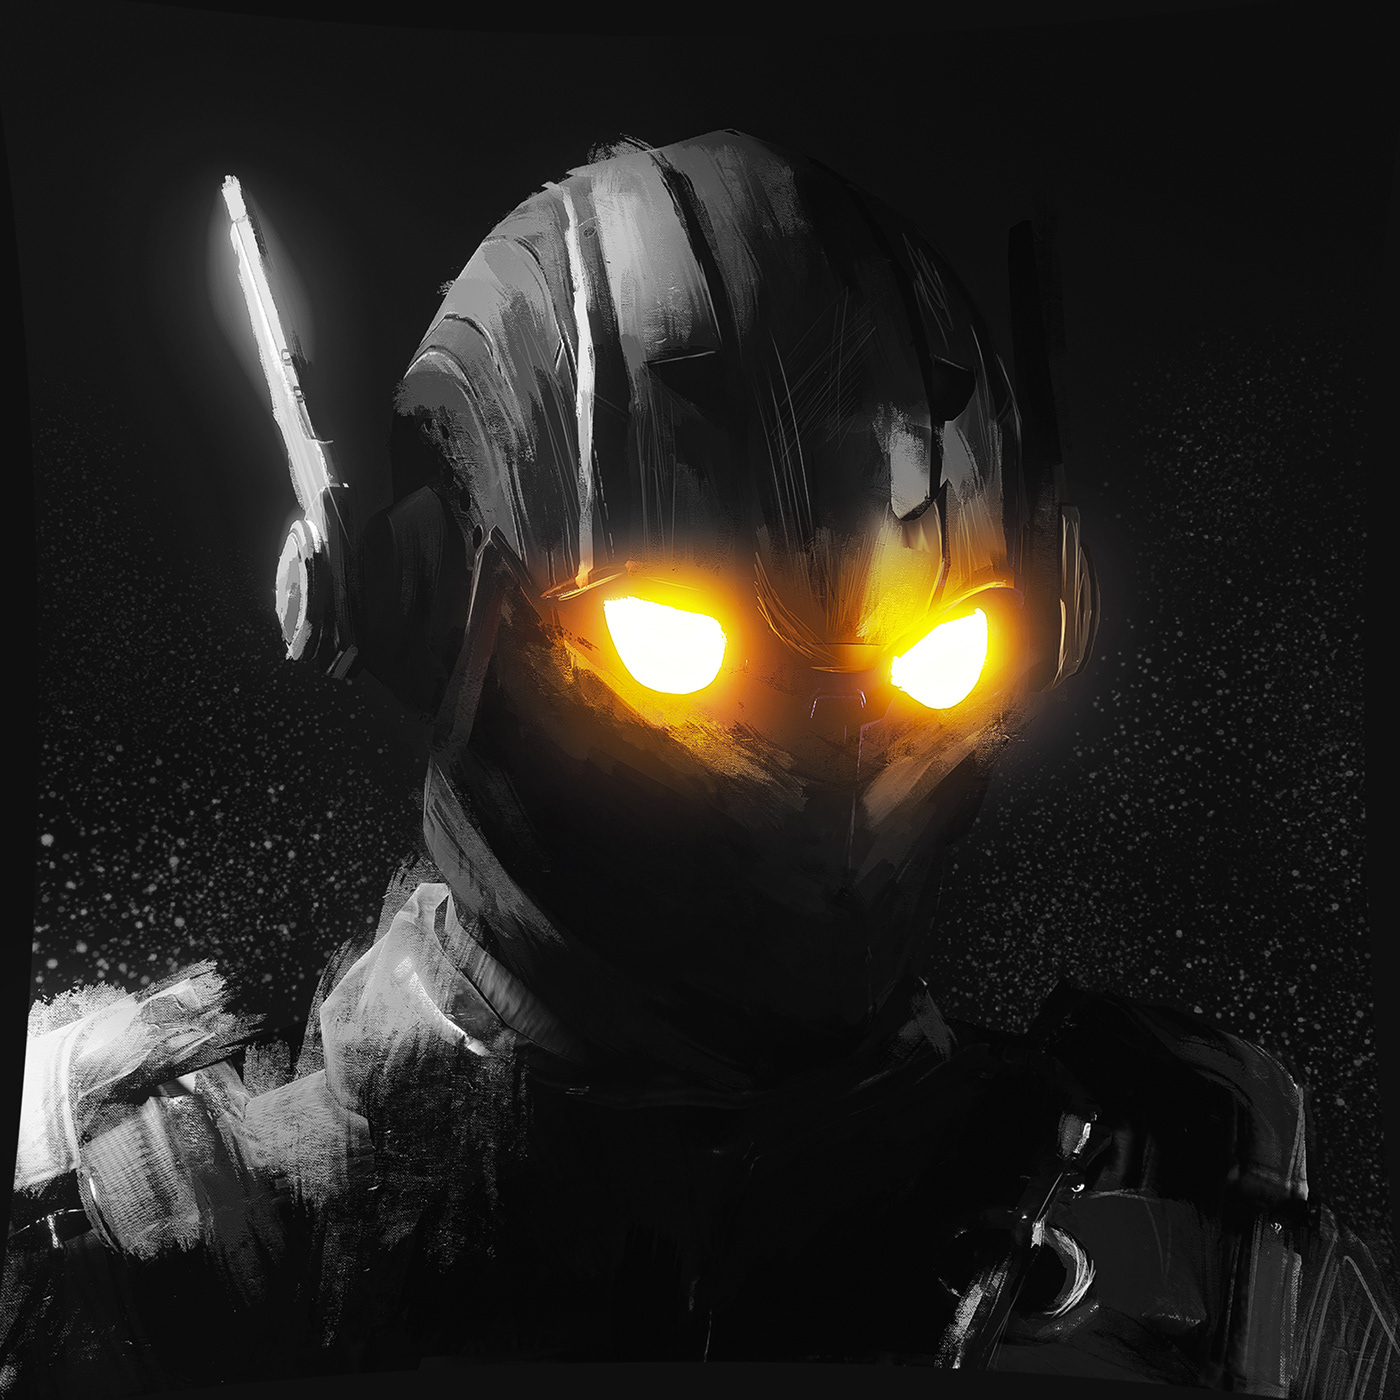 Bungie destiny 2 Destiny The Game profile picture this is nightfall